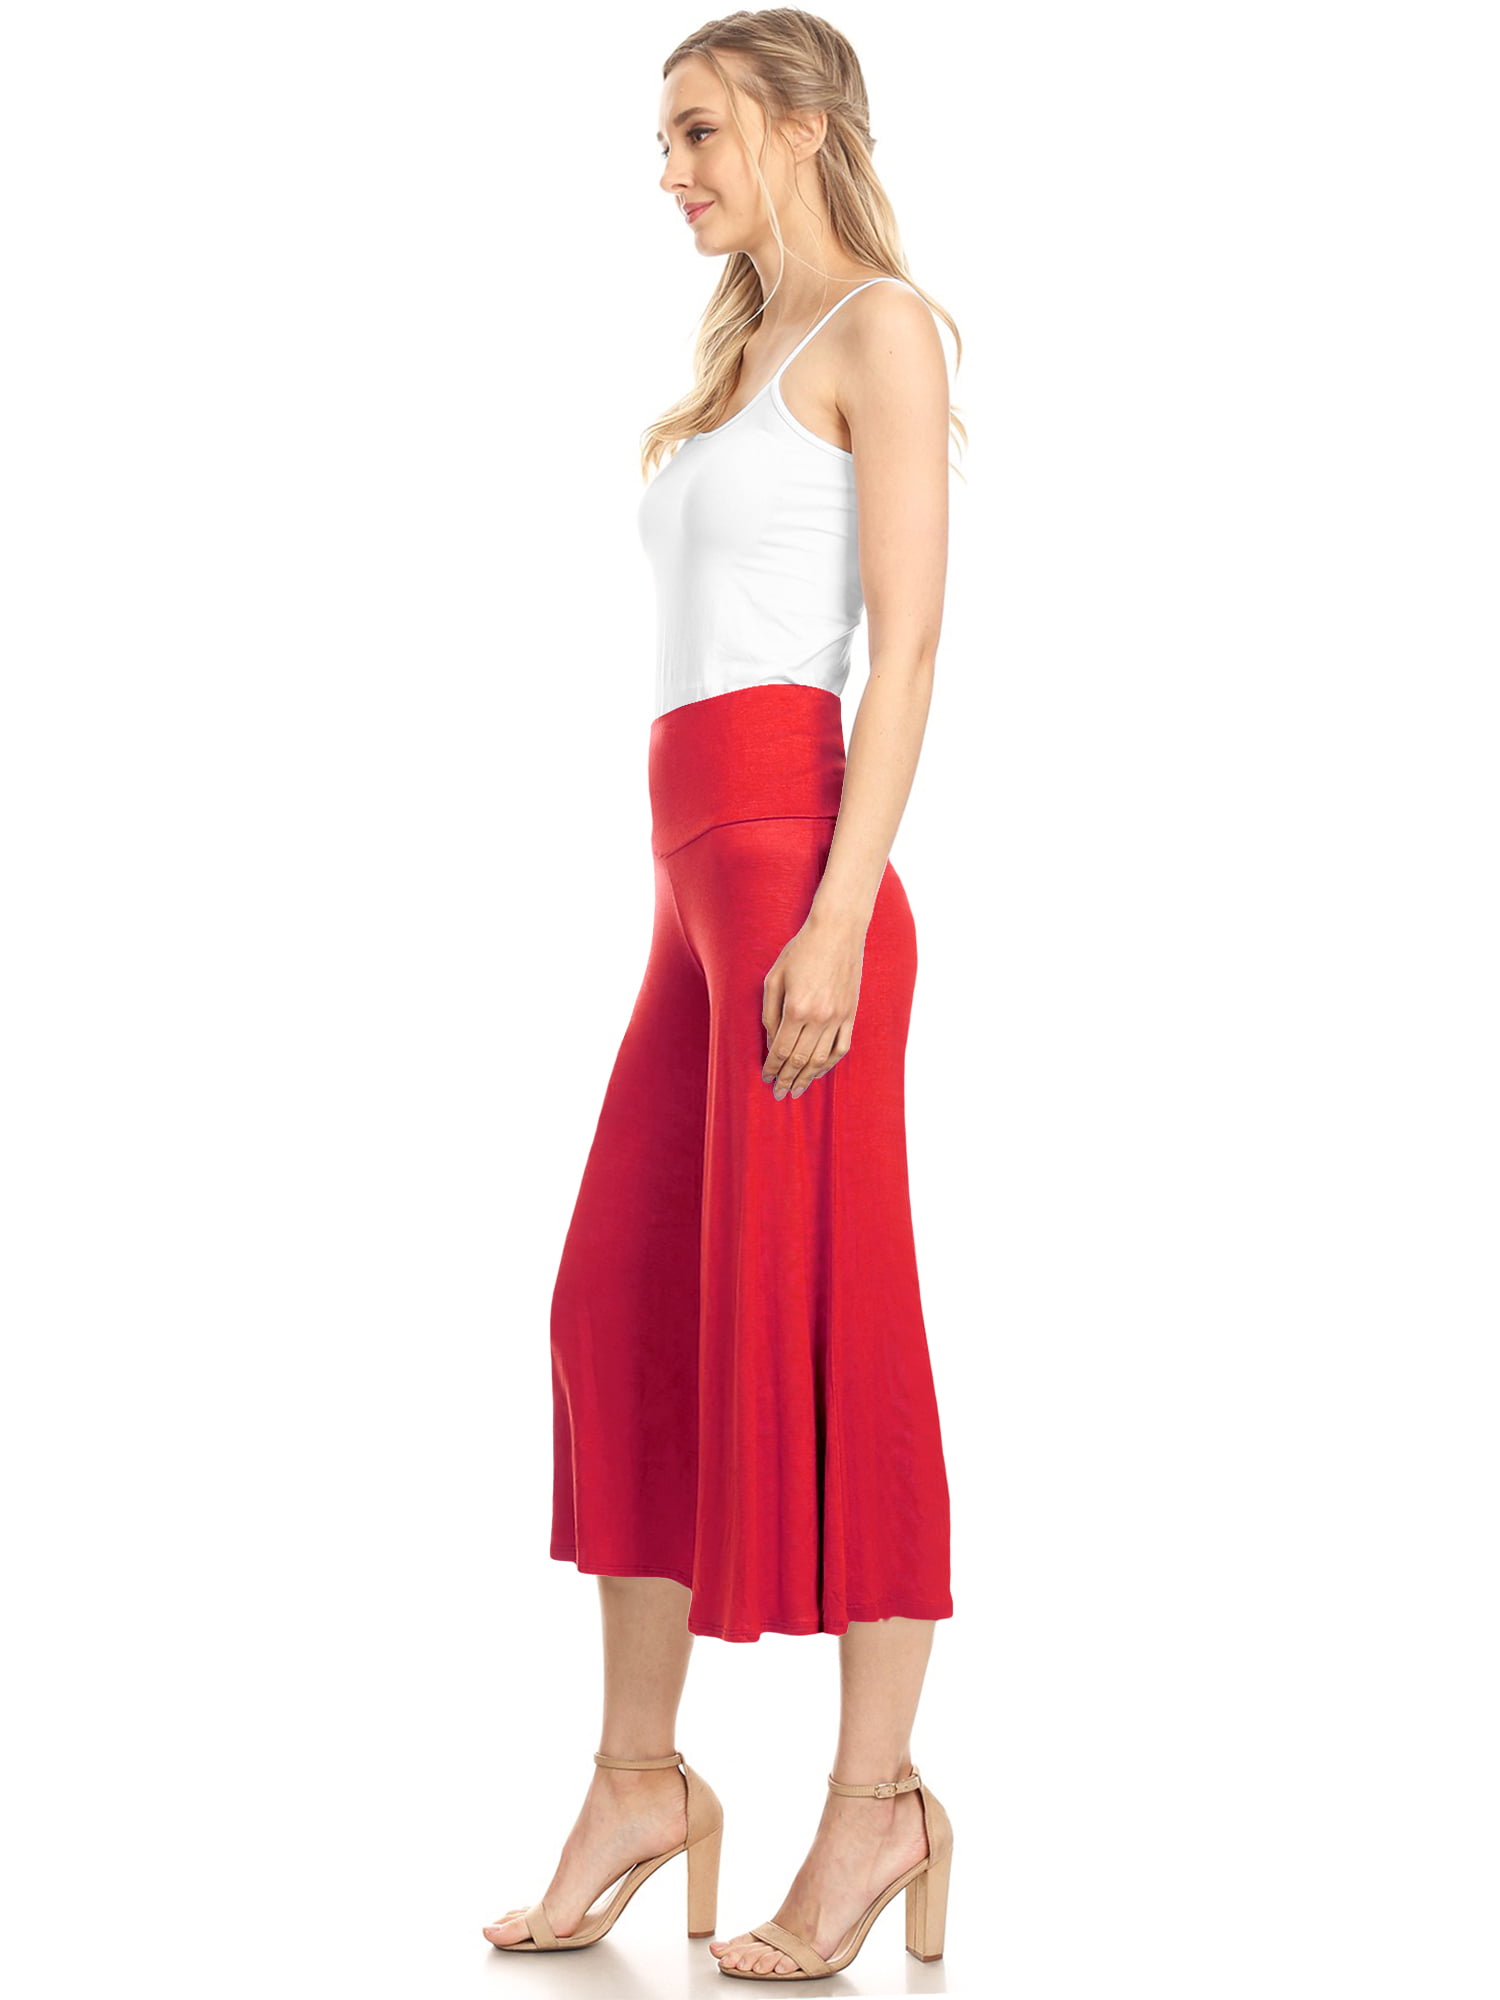 Made by Johnny Women\'s Knit Culottes Pants L RED